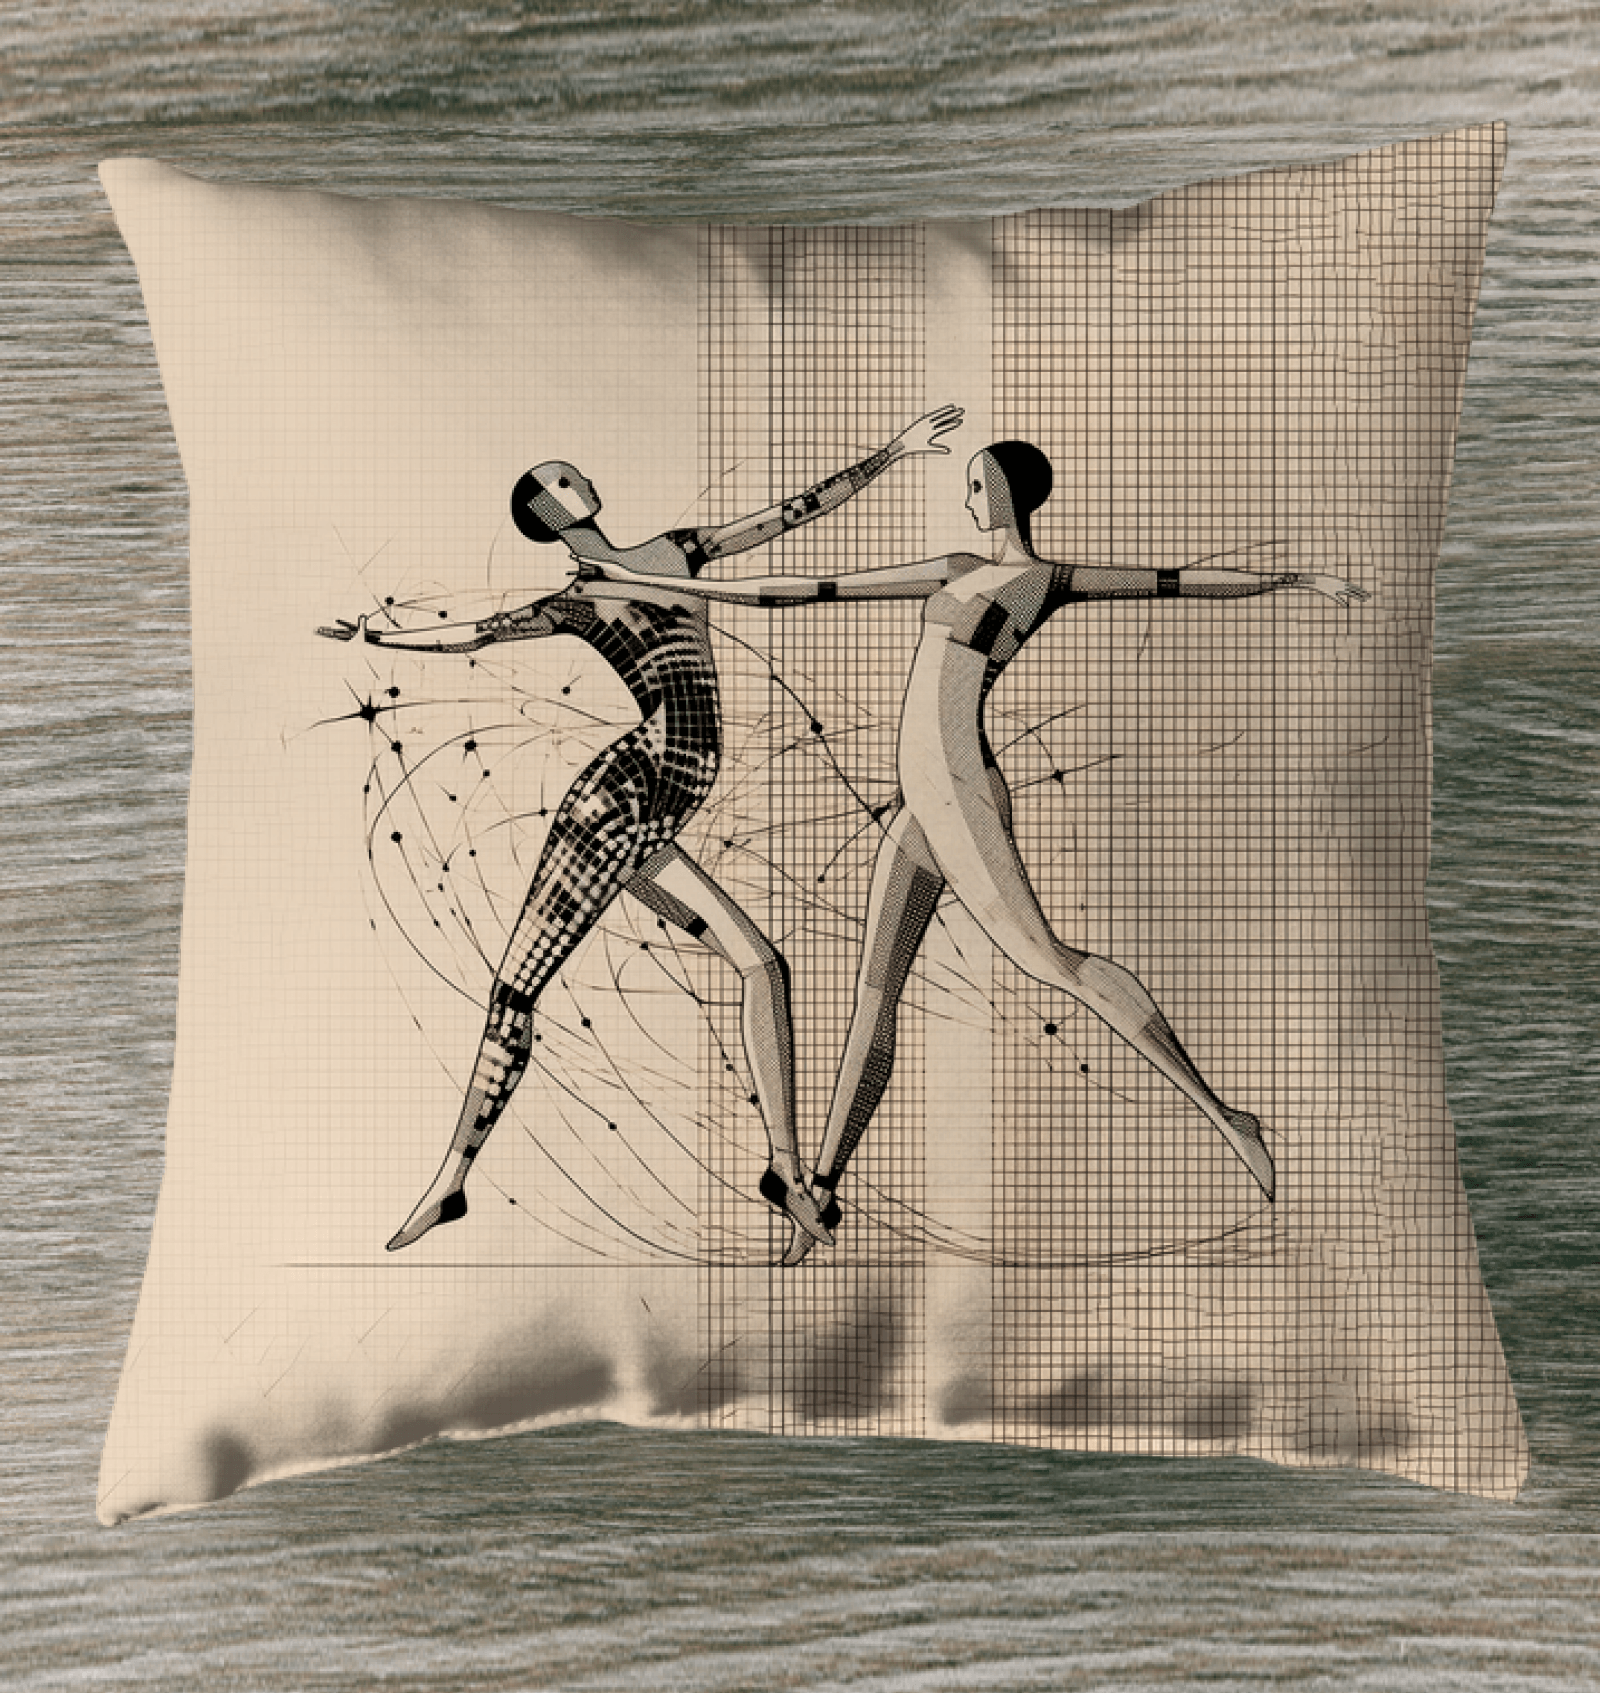 Sultry Women s Dance Style Outdoor Pillow - Beyond T-shirts